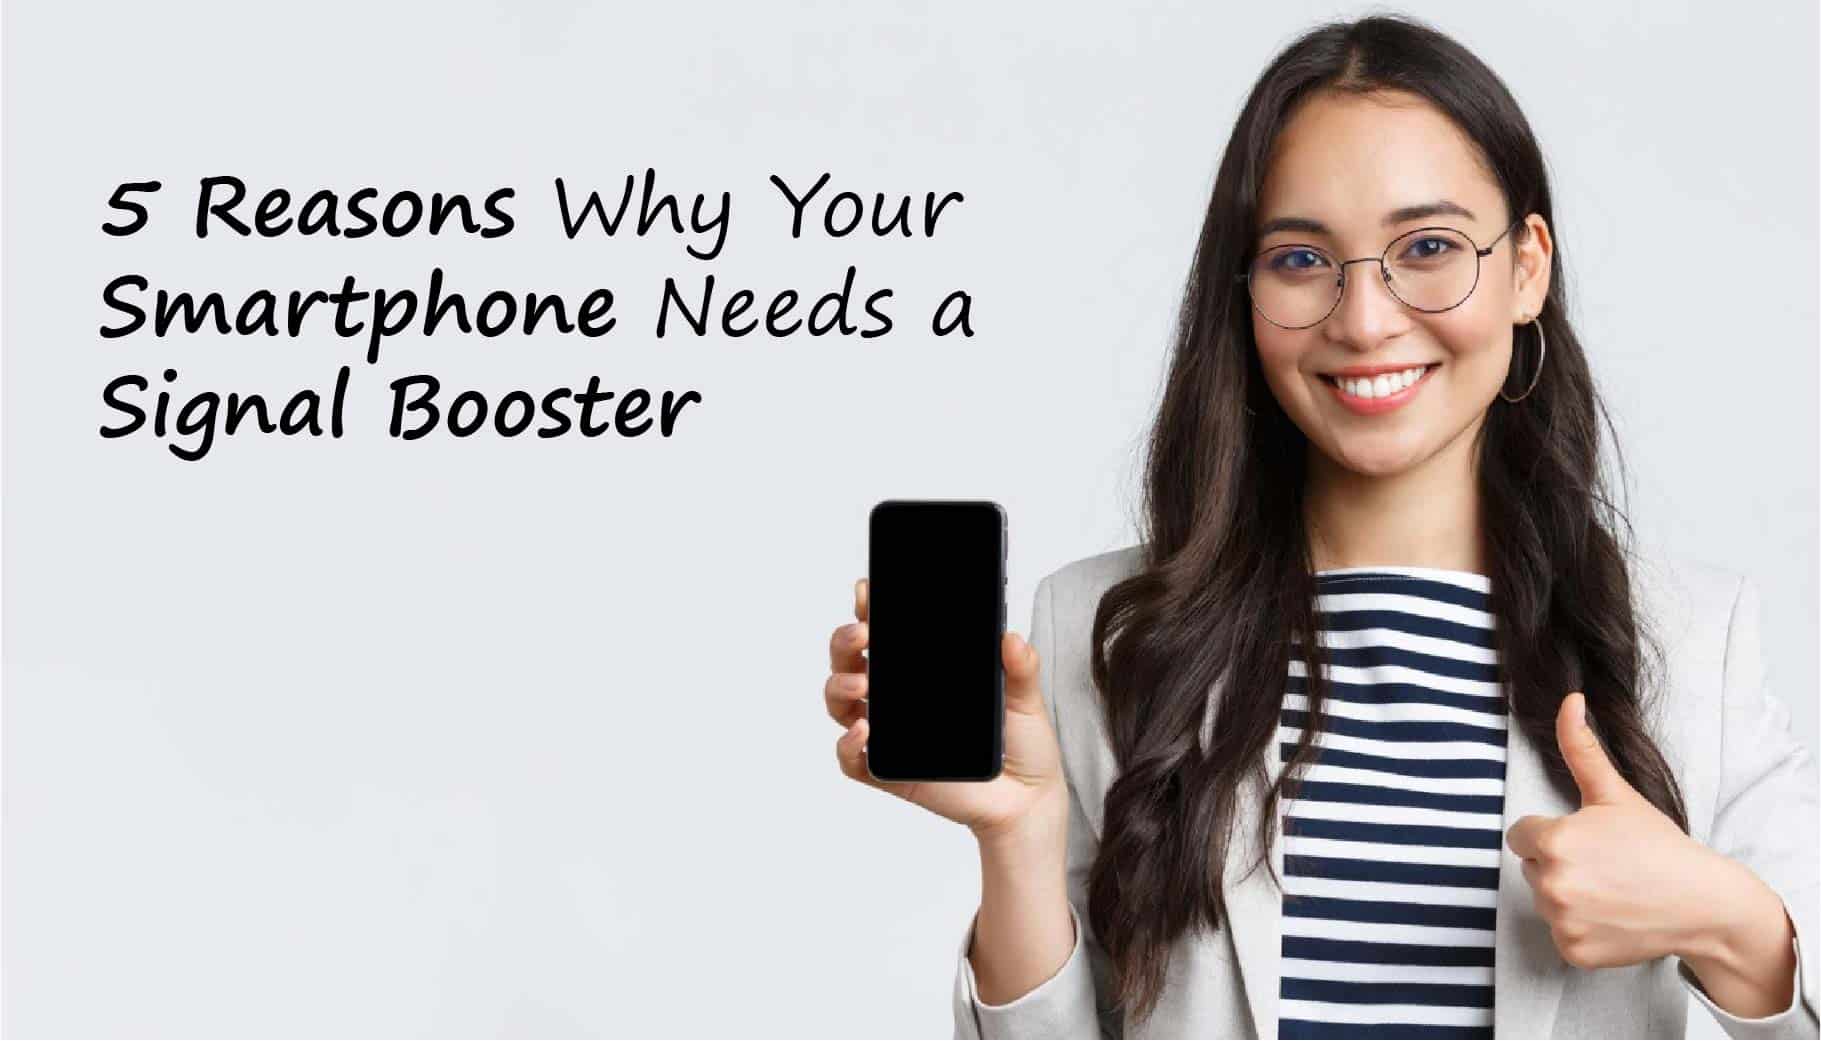 5 reasons why your smartphone needs a booster